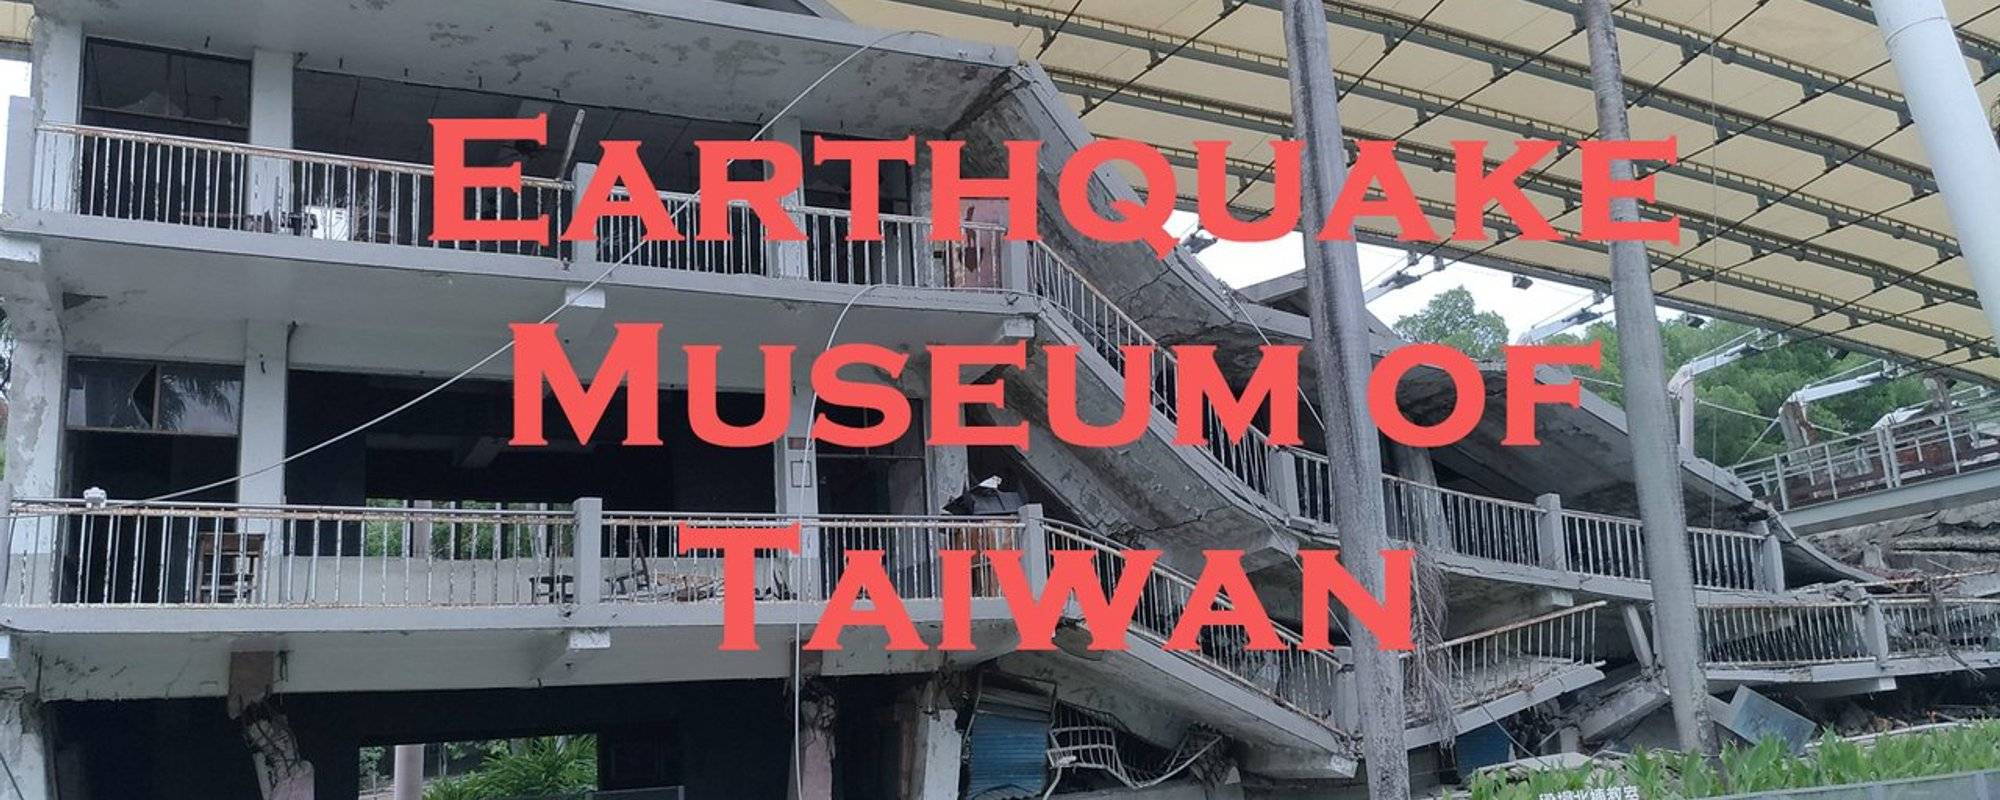 Visiting the Earthquake Museum of Taiwan